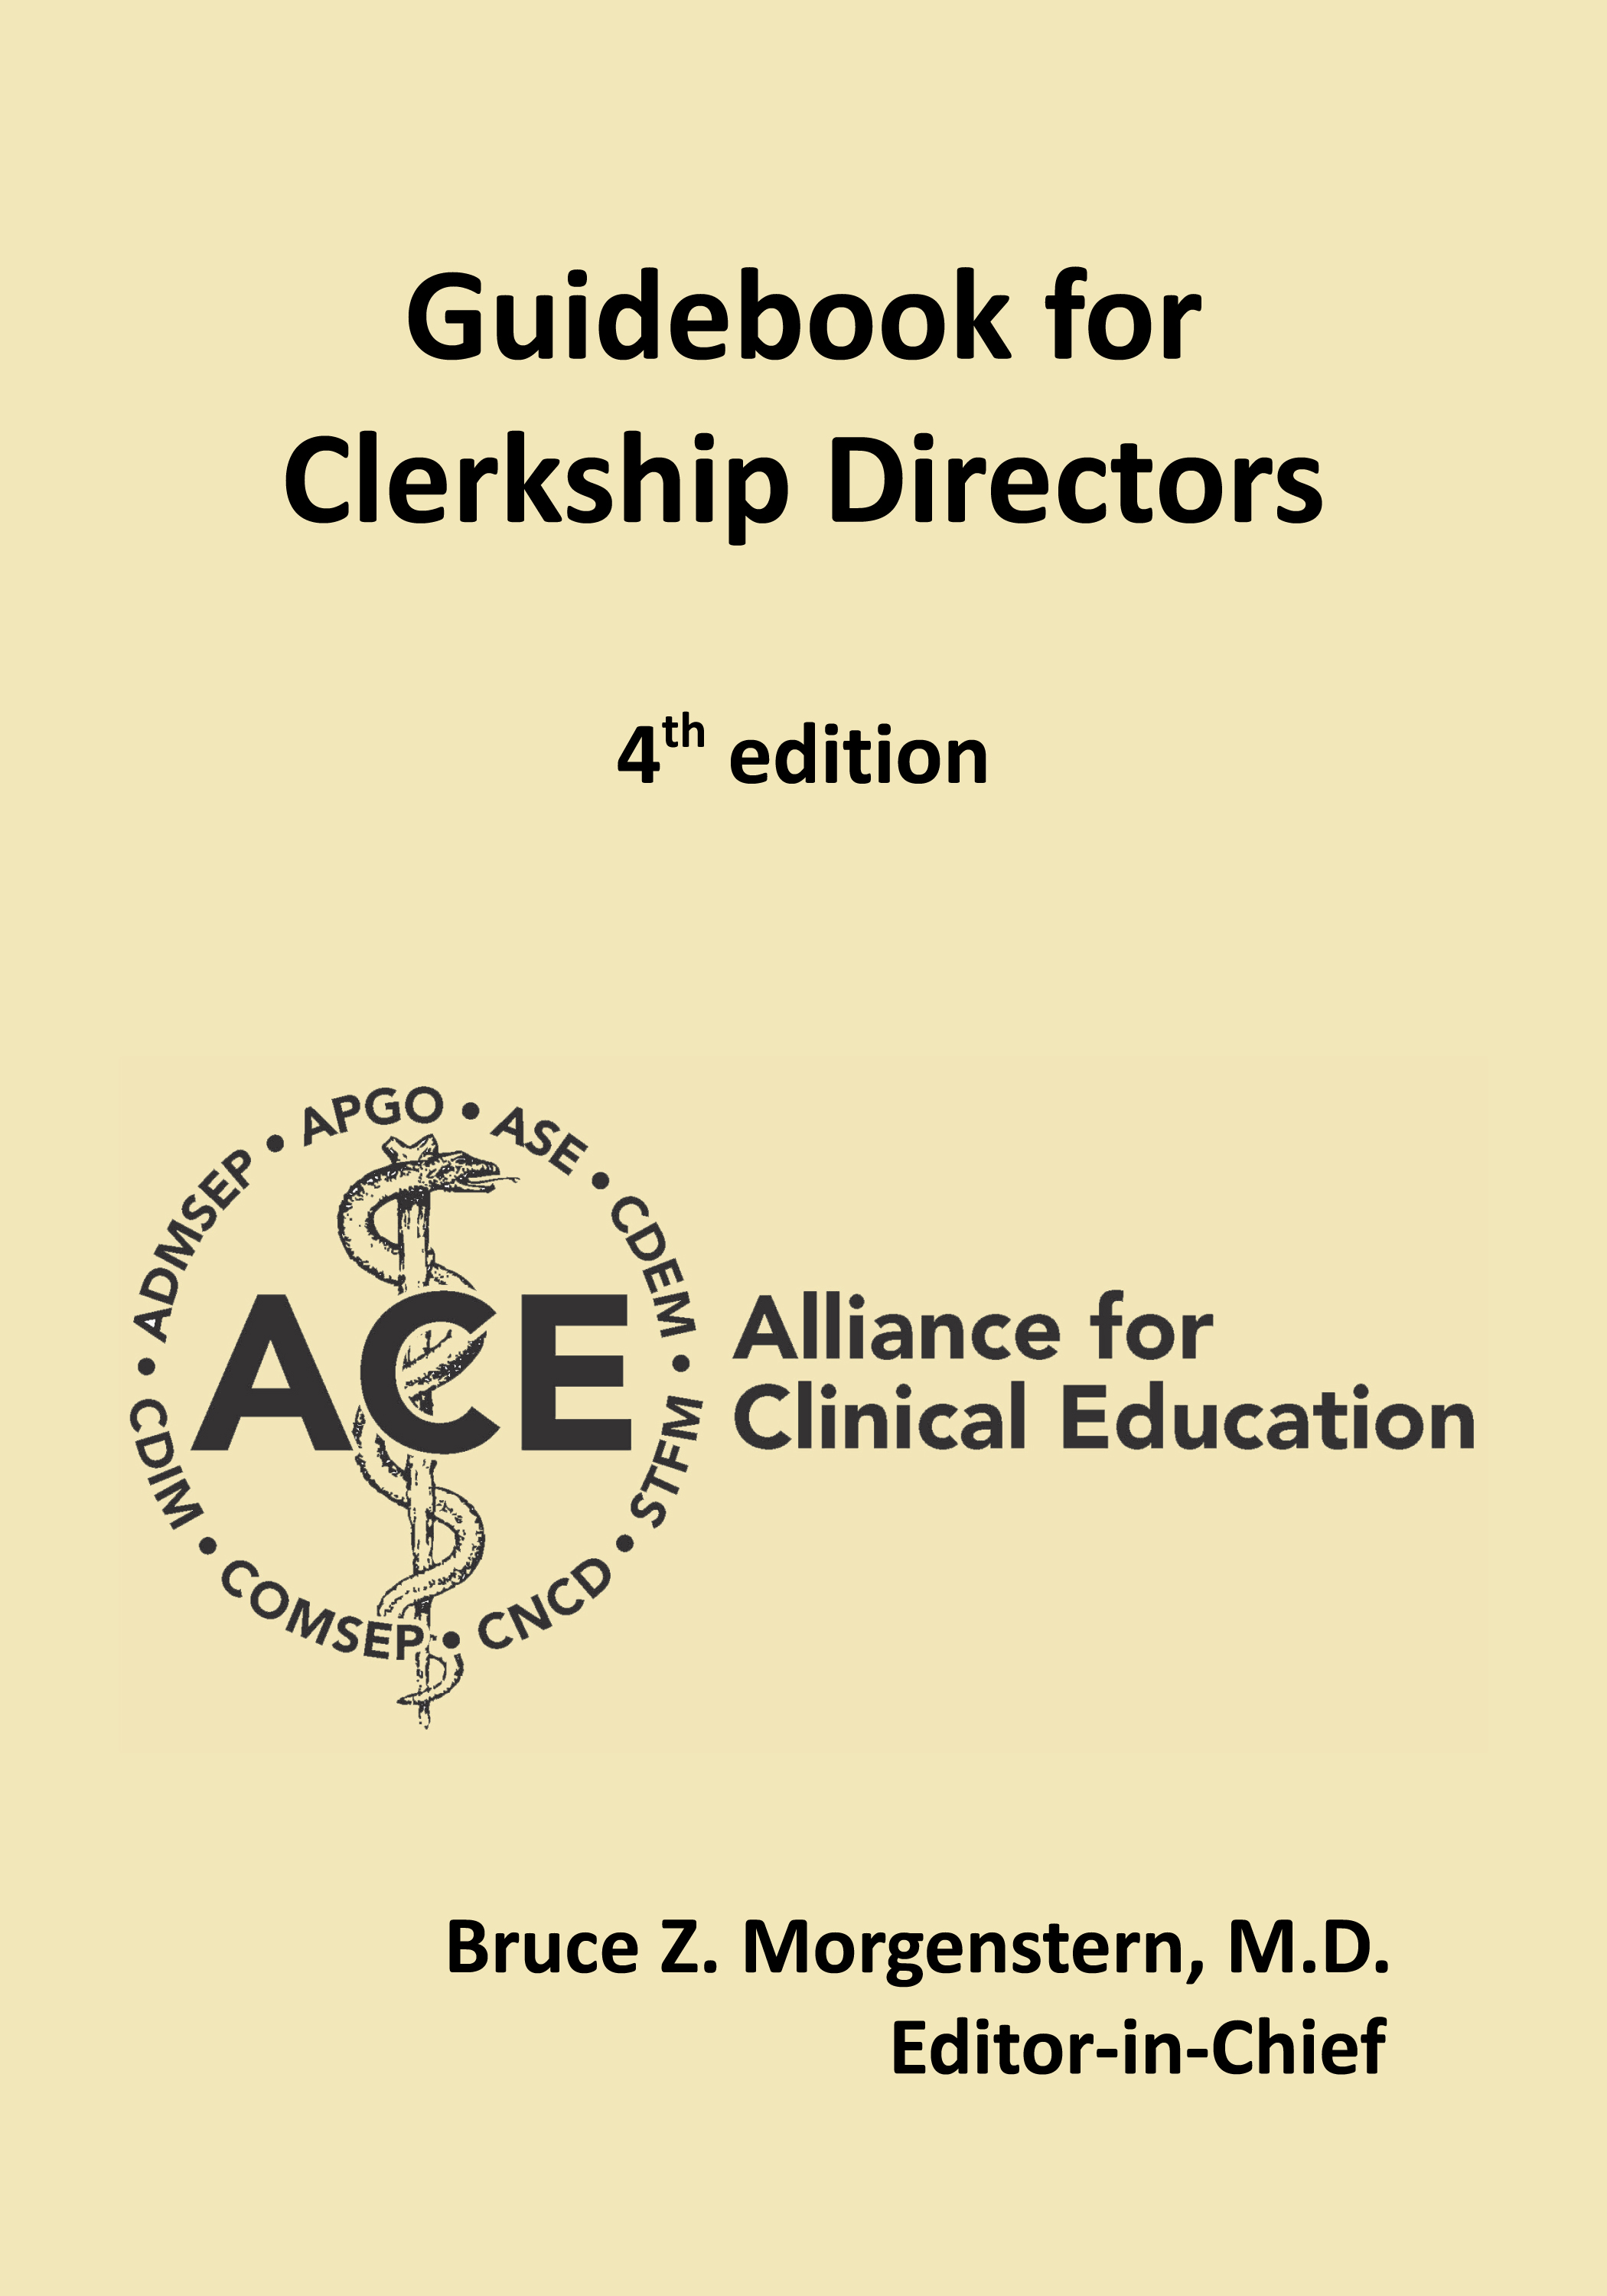 Guidebook for Clerkship Directors - 4th edition - by the Alliance for Clinical Education